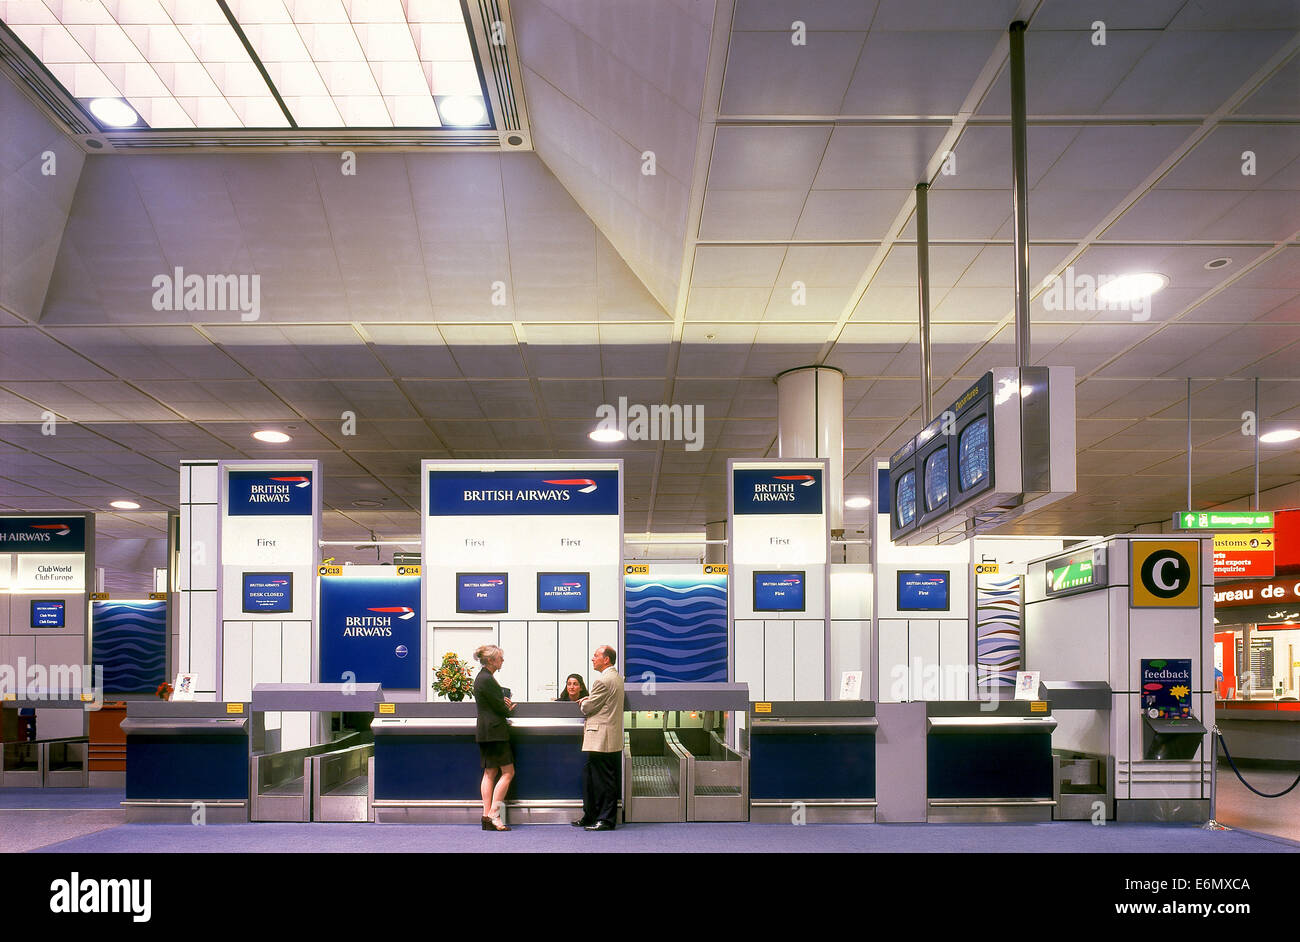 British Airways check-in desk at Gatwick Airport Stock Photo - Alamy